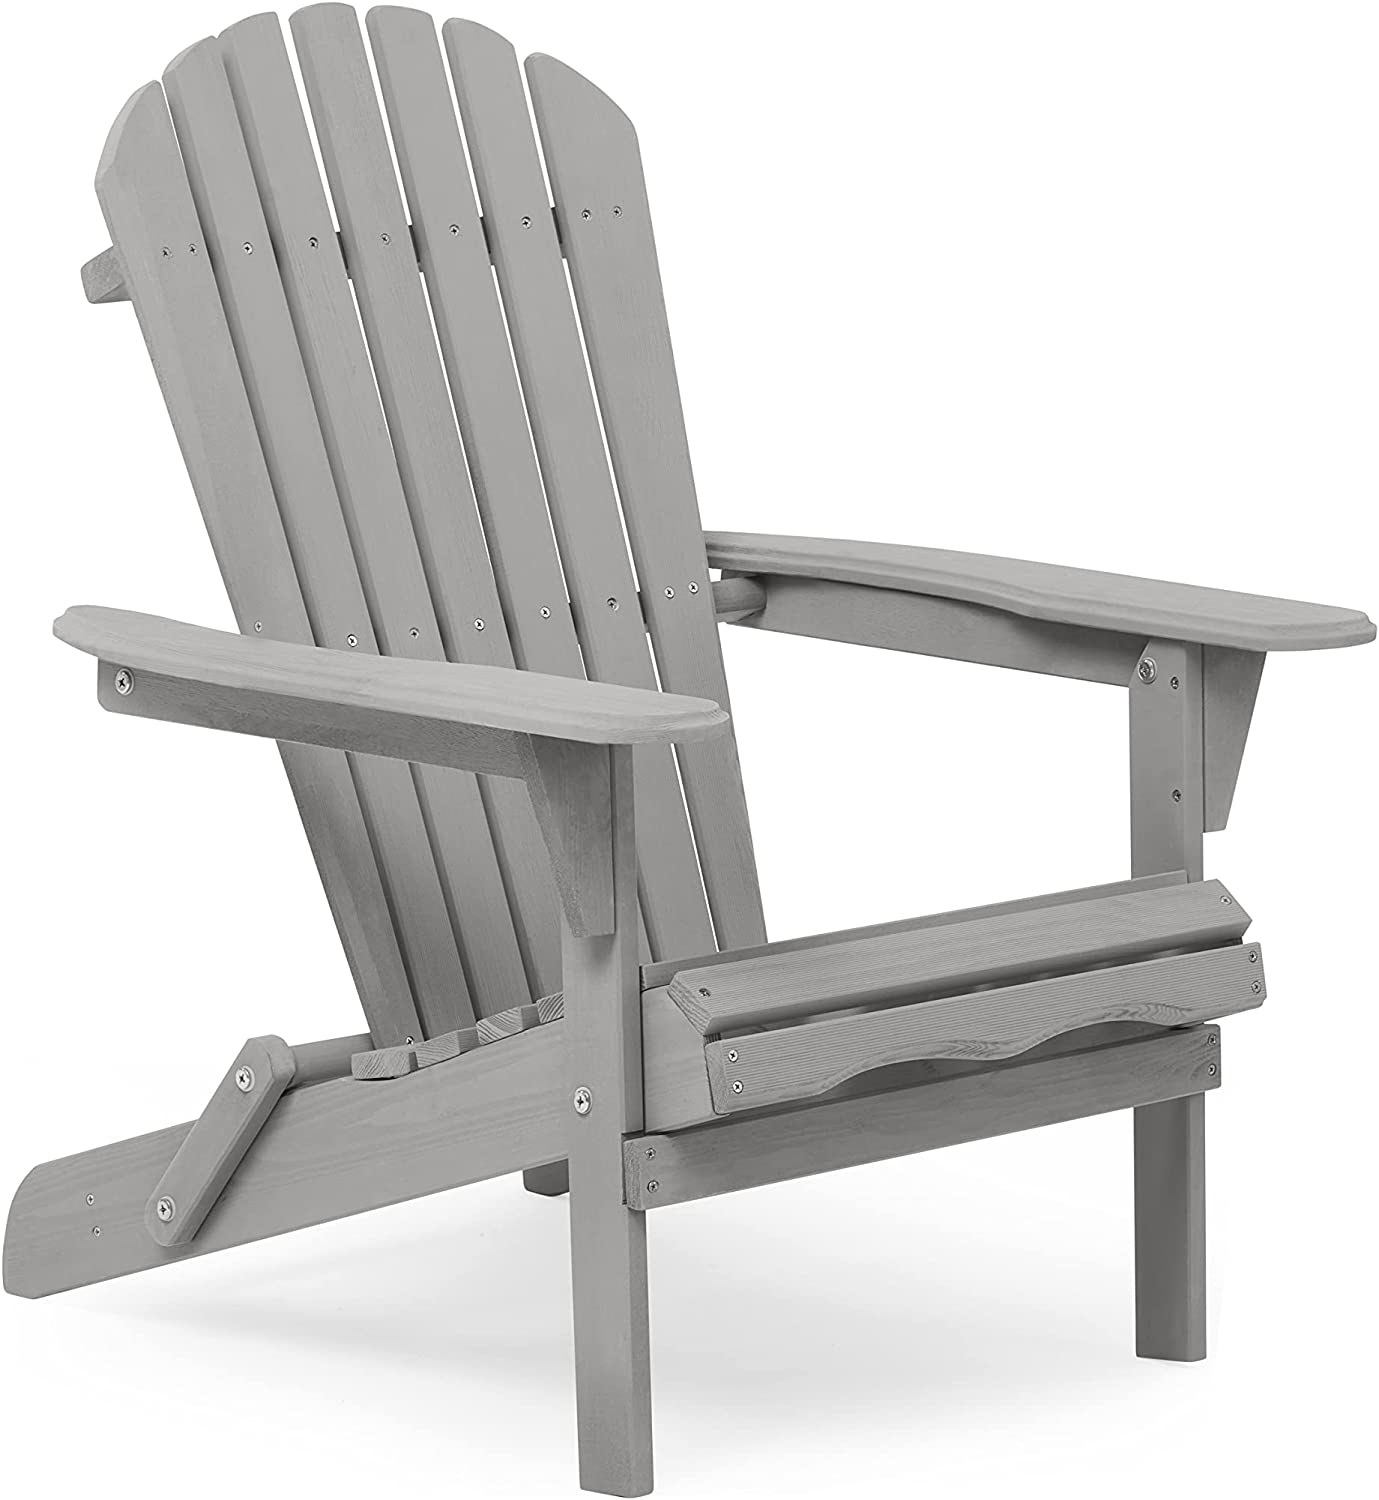 Wood Lounge Patio Chair for Garden Outdoor Wooden Folding Adirondack Chair Set of 2 Solid Cedar Wood Lounge Patio Chair for Garden, Lawn, Backyard, - image 2 of 5